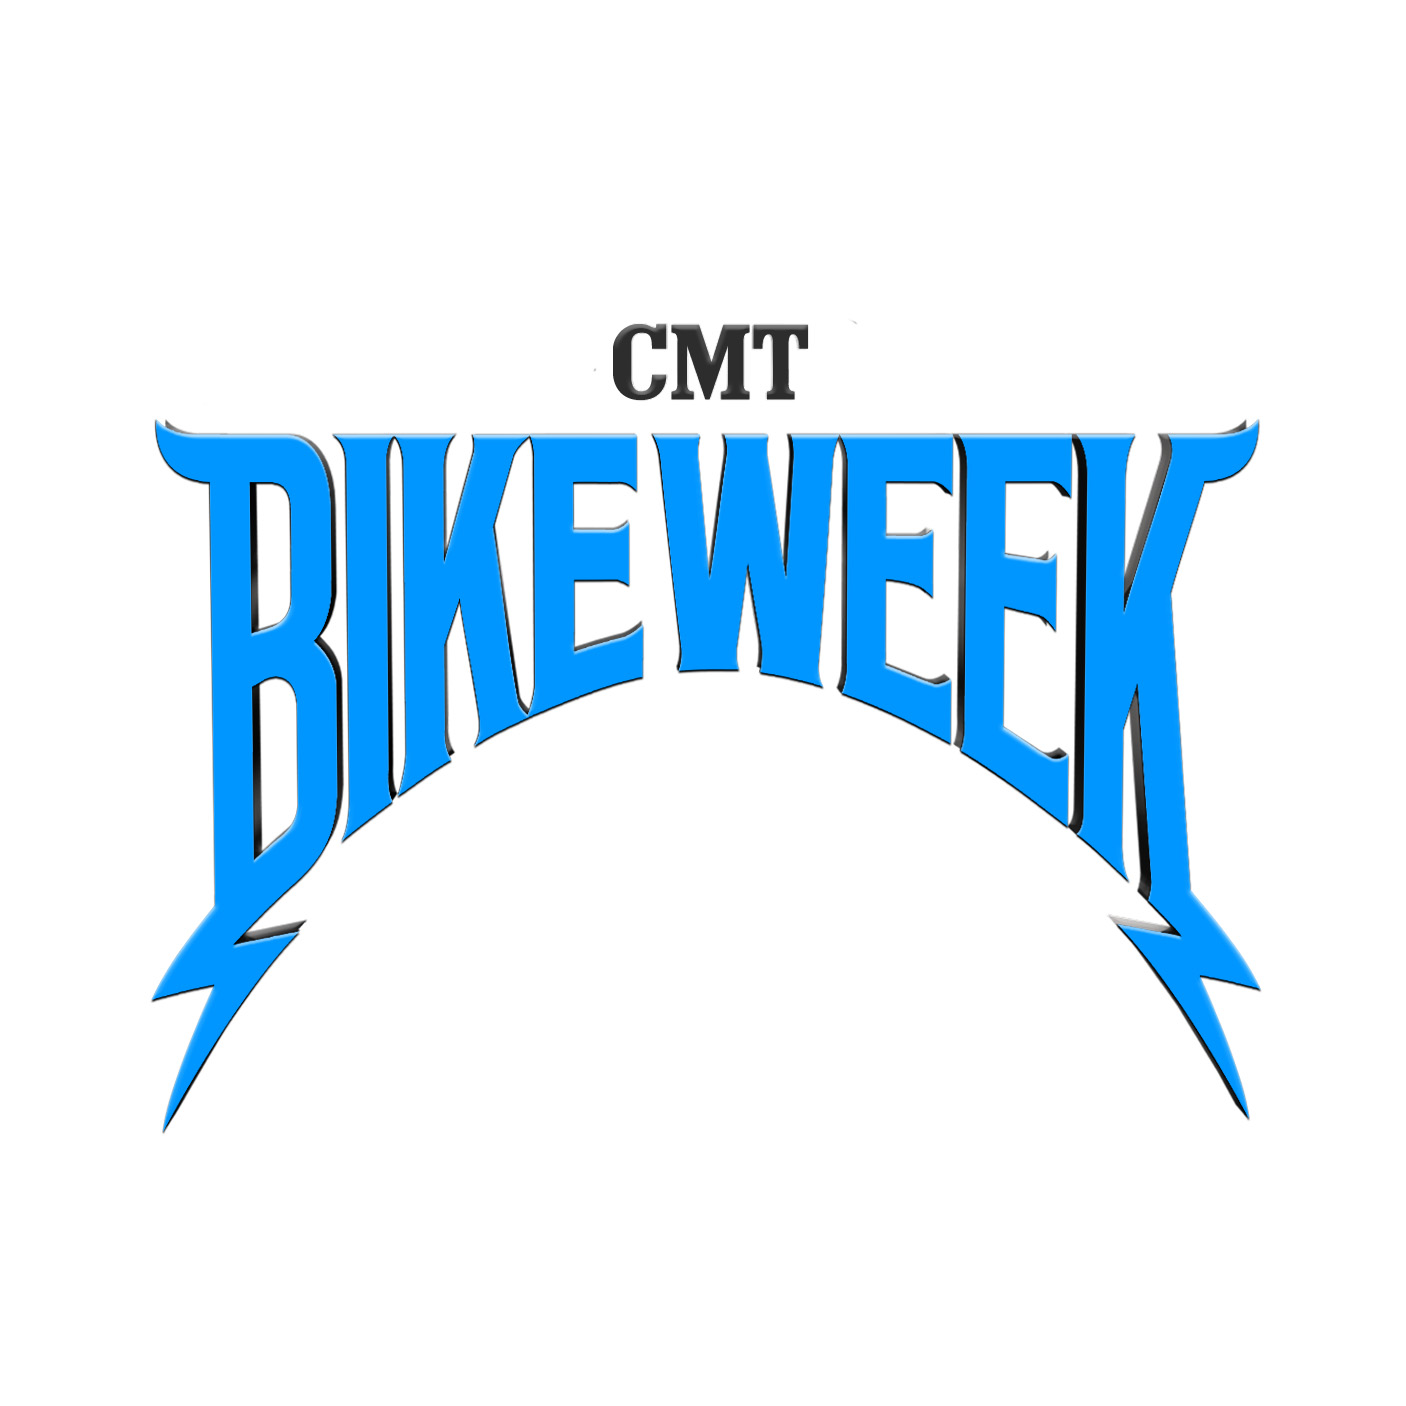 Branding, Wordmark and type treatment for CMT's annual Bike Week celebrating motorcycles.